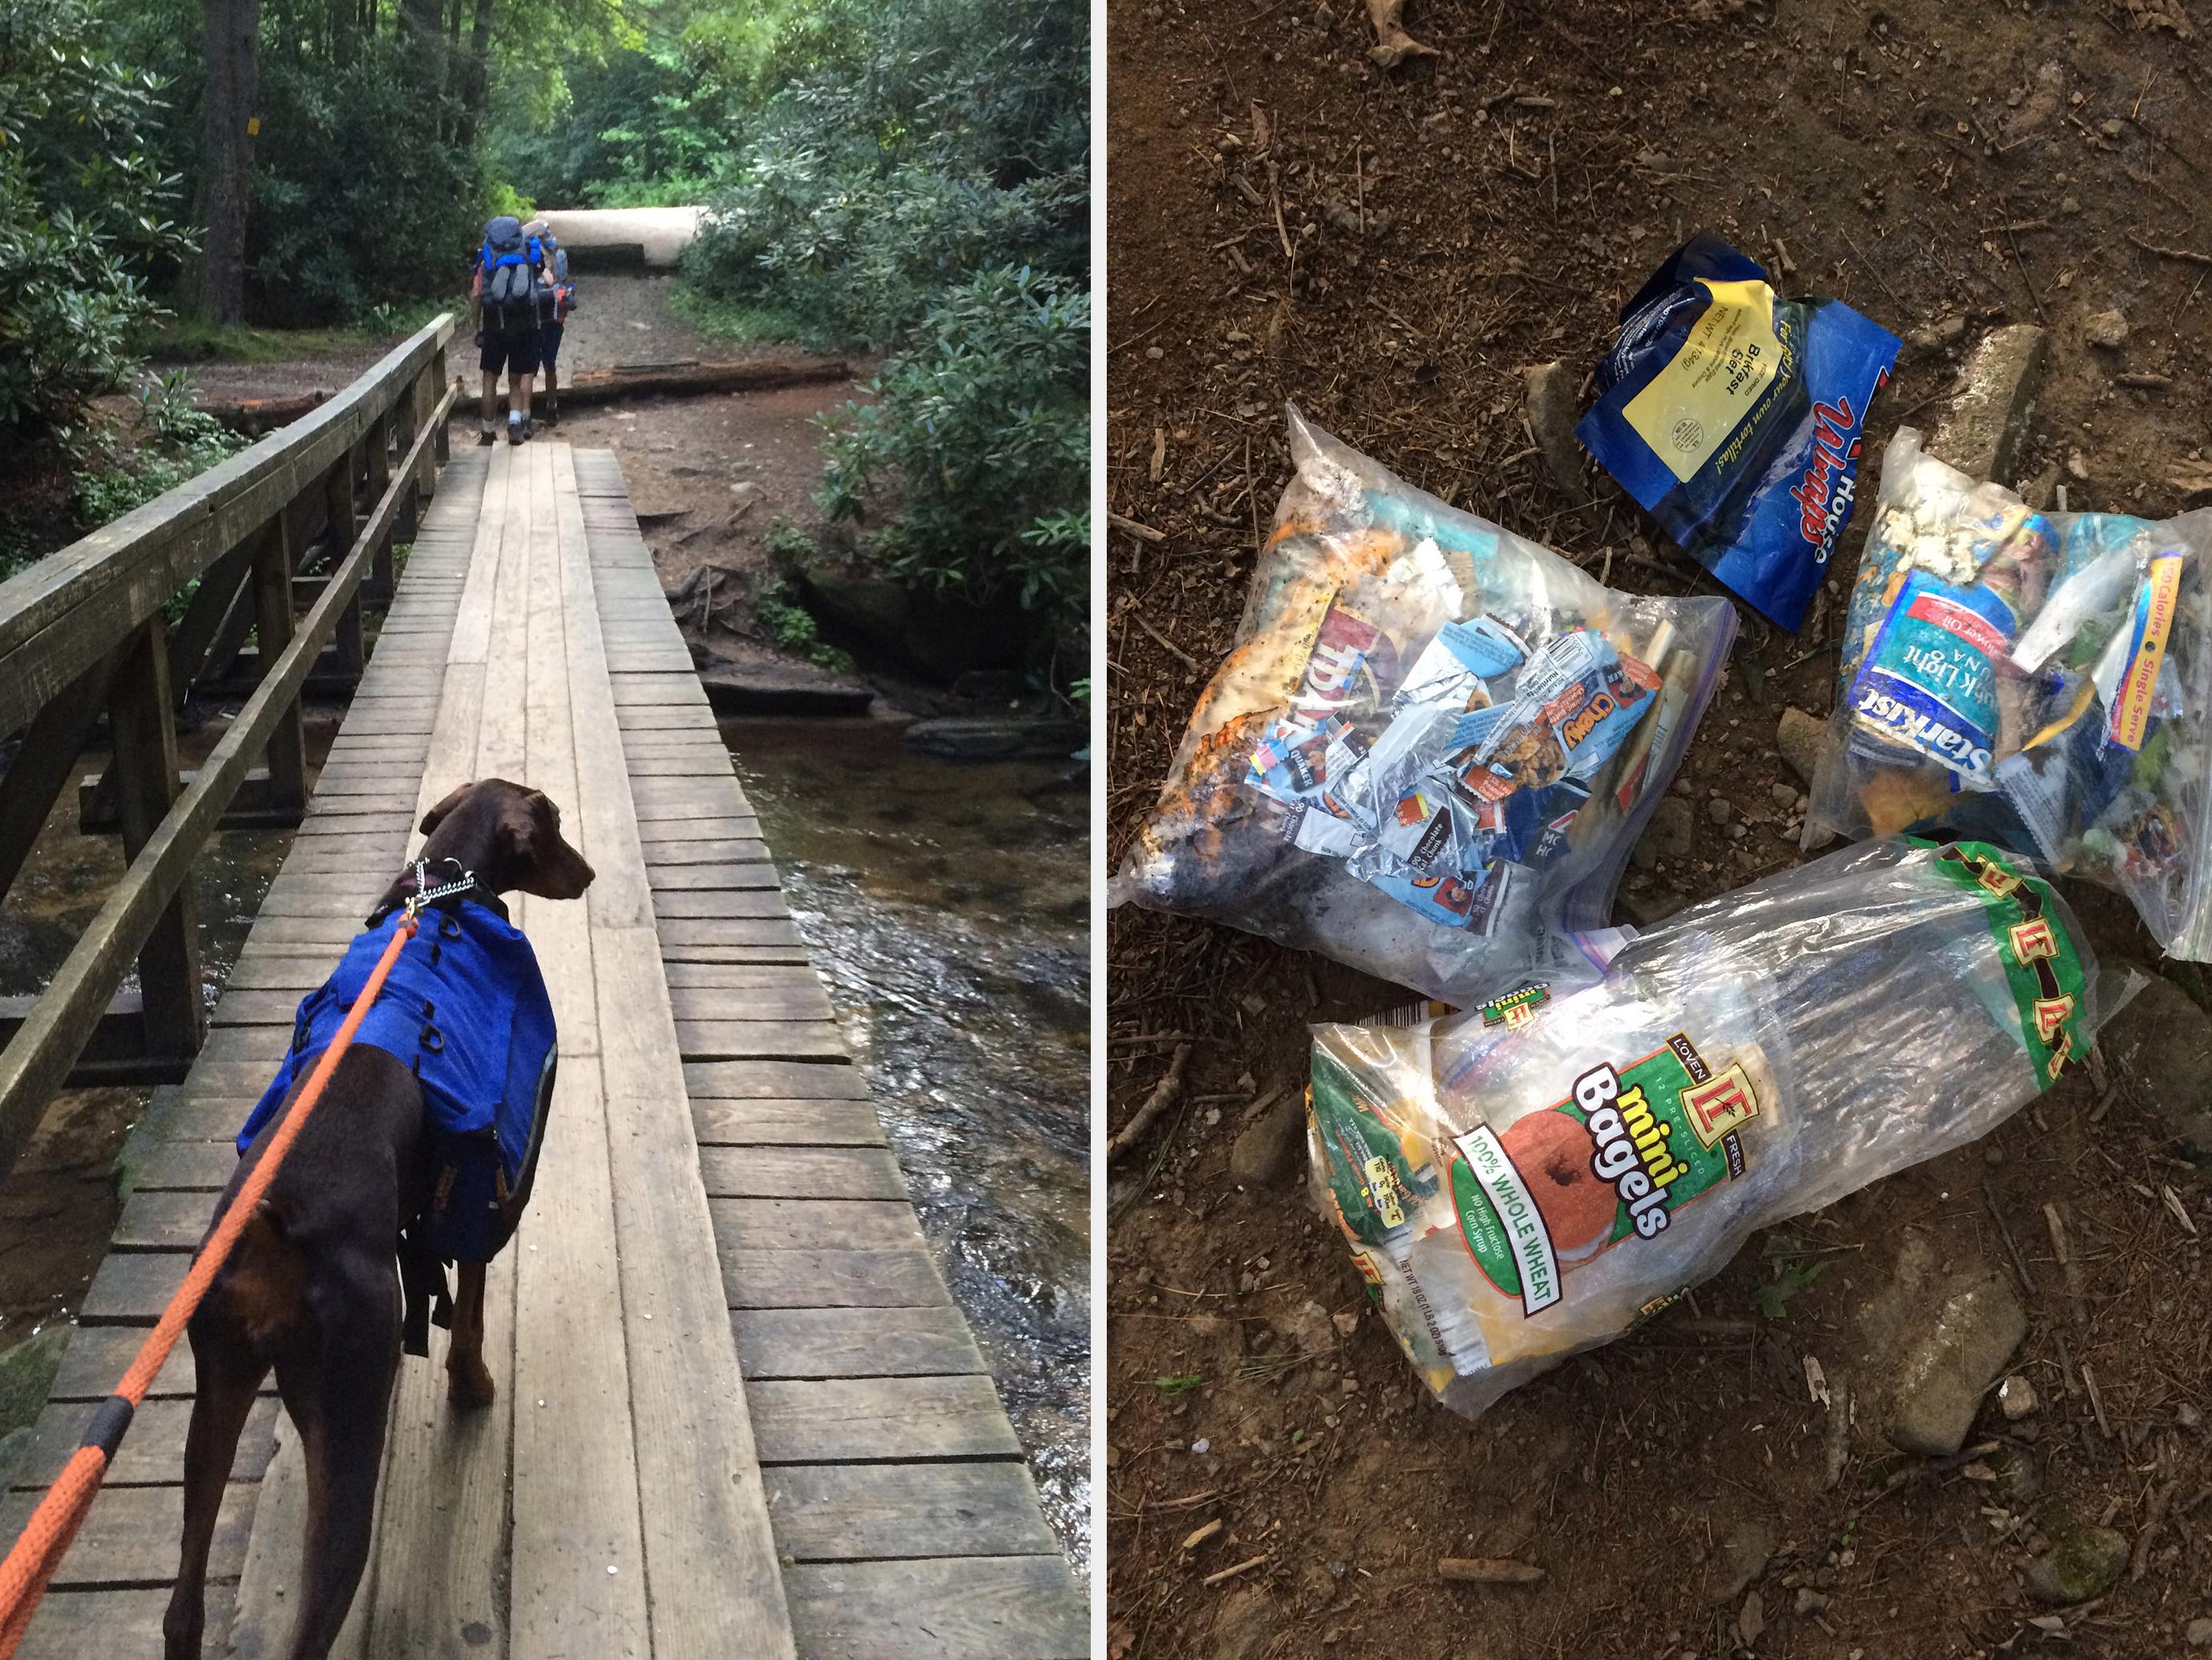 Keep dogs on leashes while on nature trails to keep them from chasing or harassing the wildlife. Bring all trash and leftover food with you when your outdoor adventure concludes. (Photos by MSU Extension Service/Evan O’Donnell)